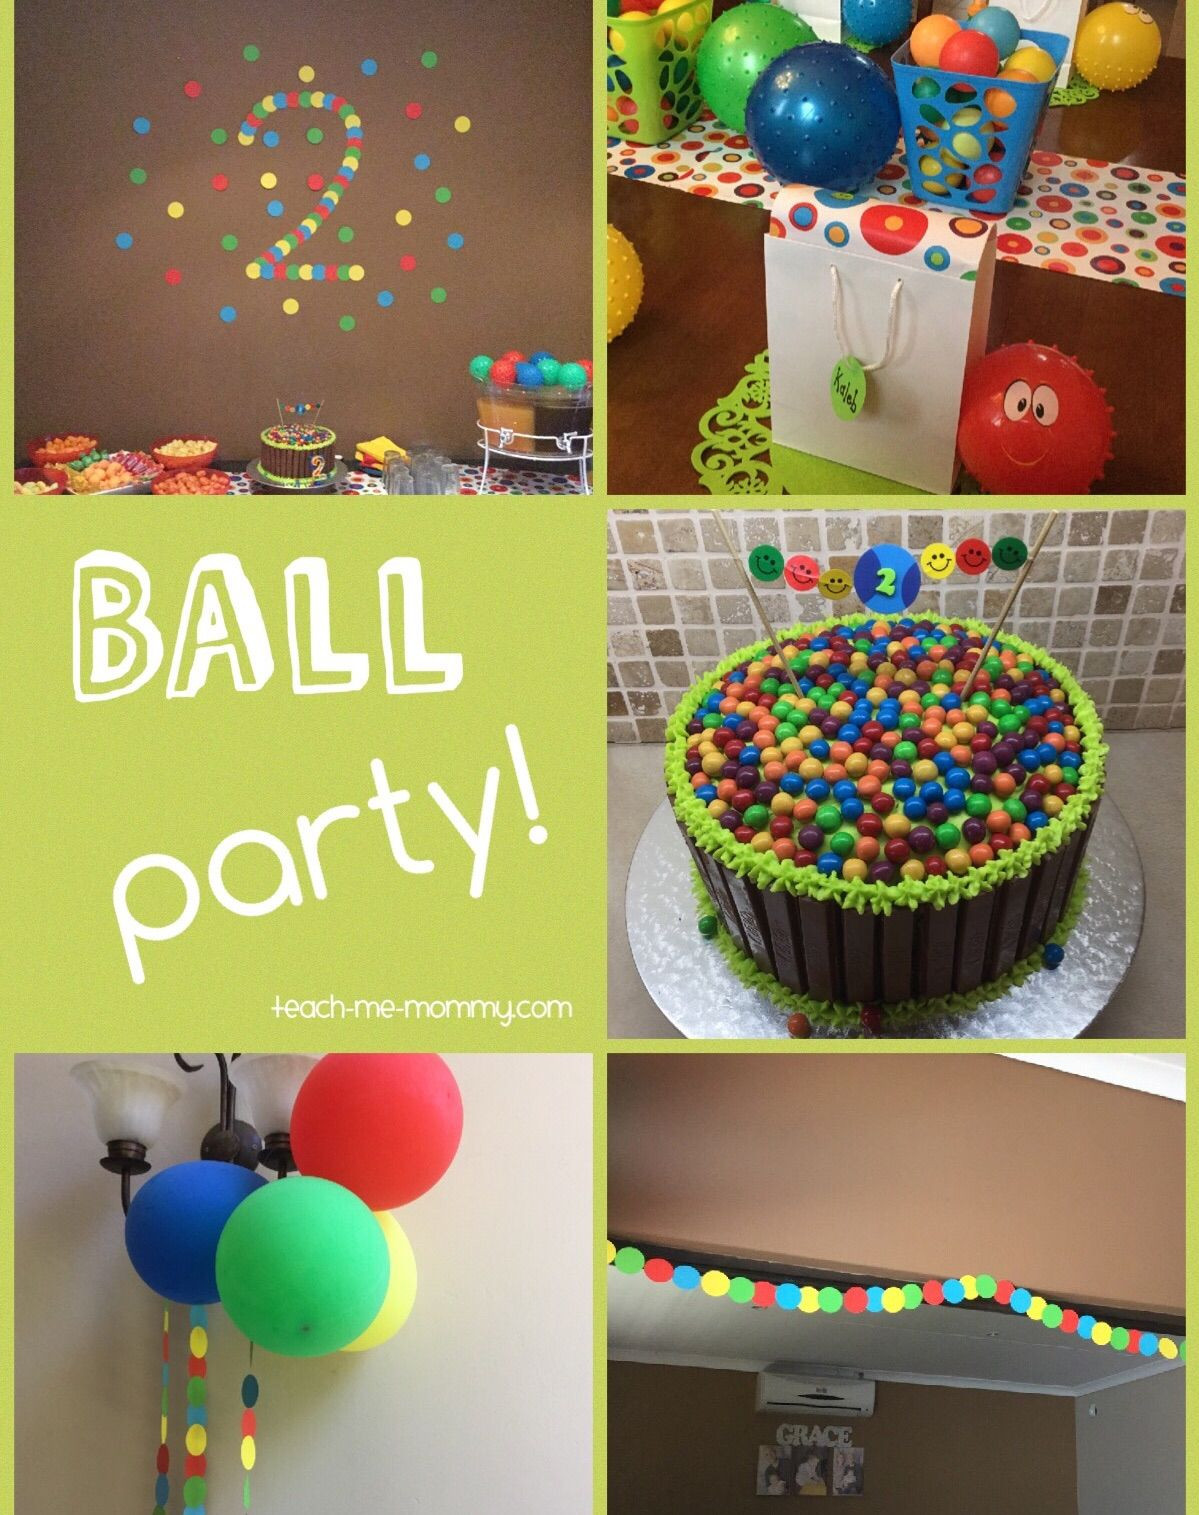 Two Years Old Birthday Party Ideas
 Ball Themed Party for a 2 Year Old Teach Me Mommy